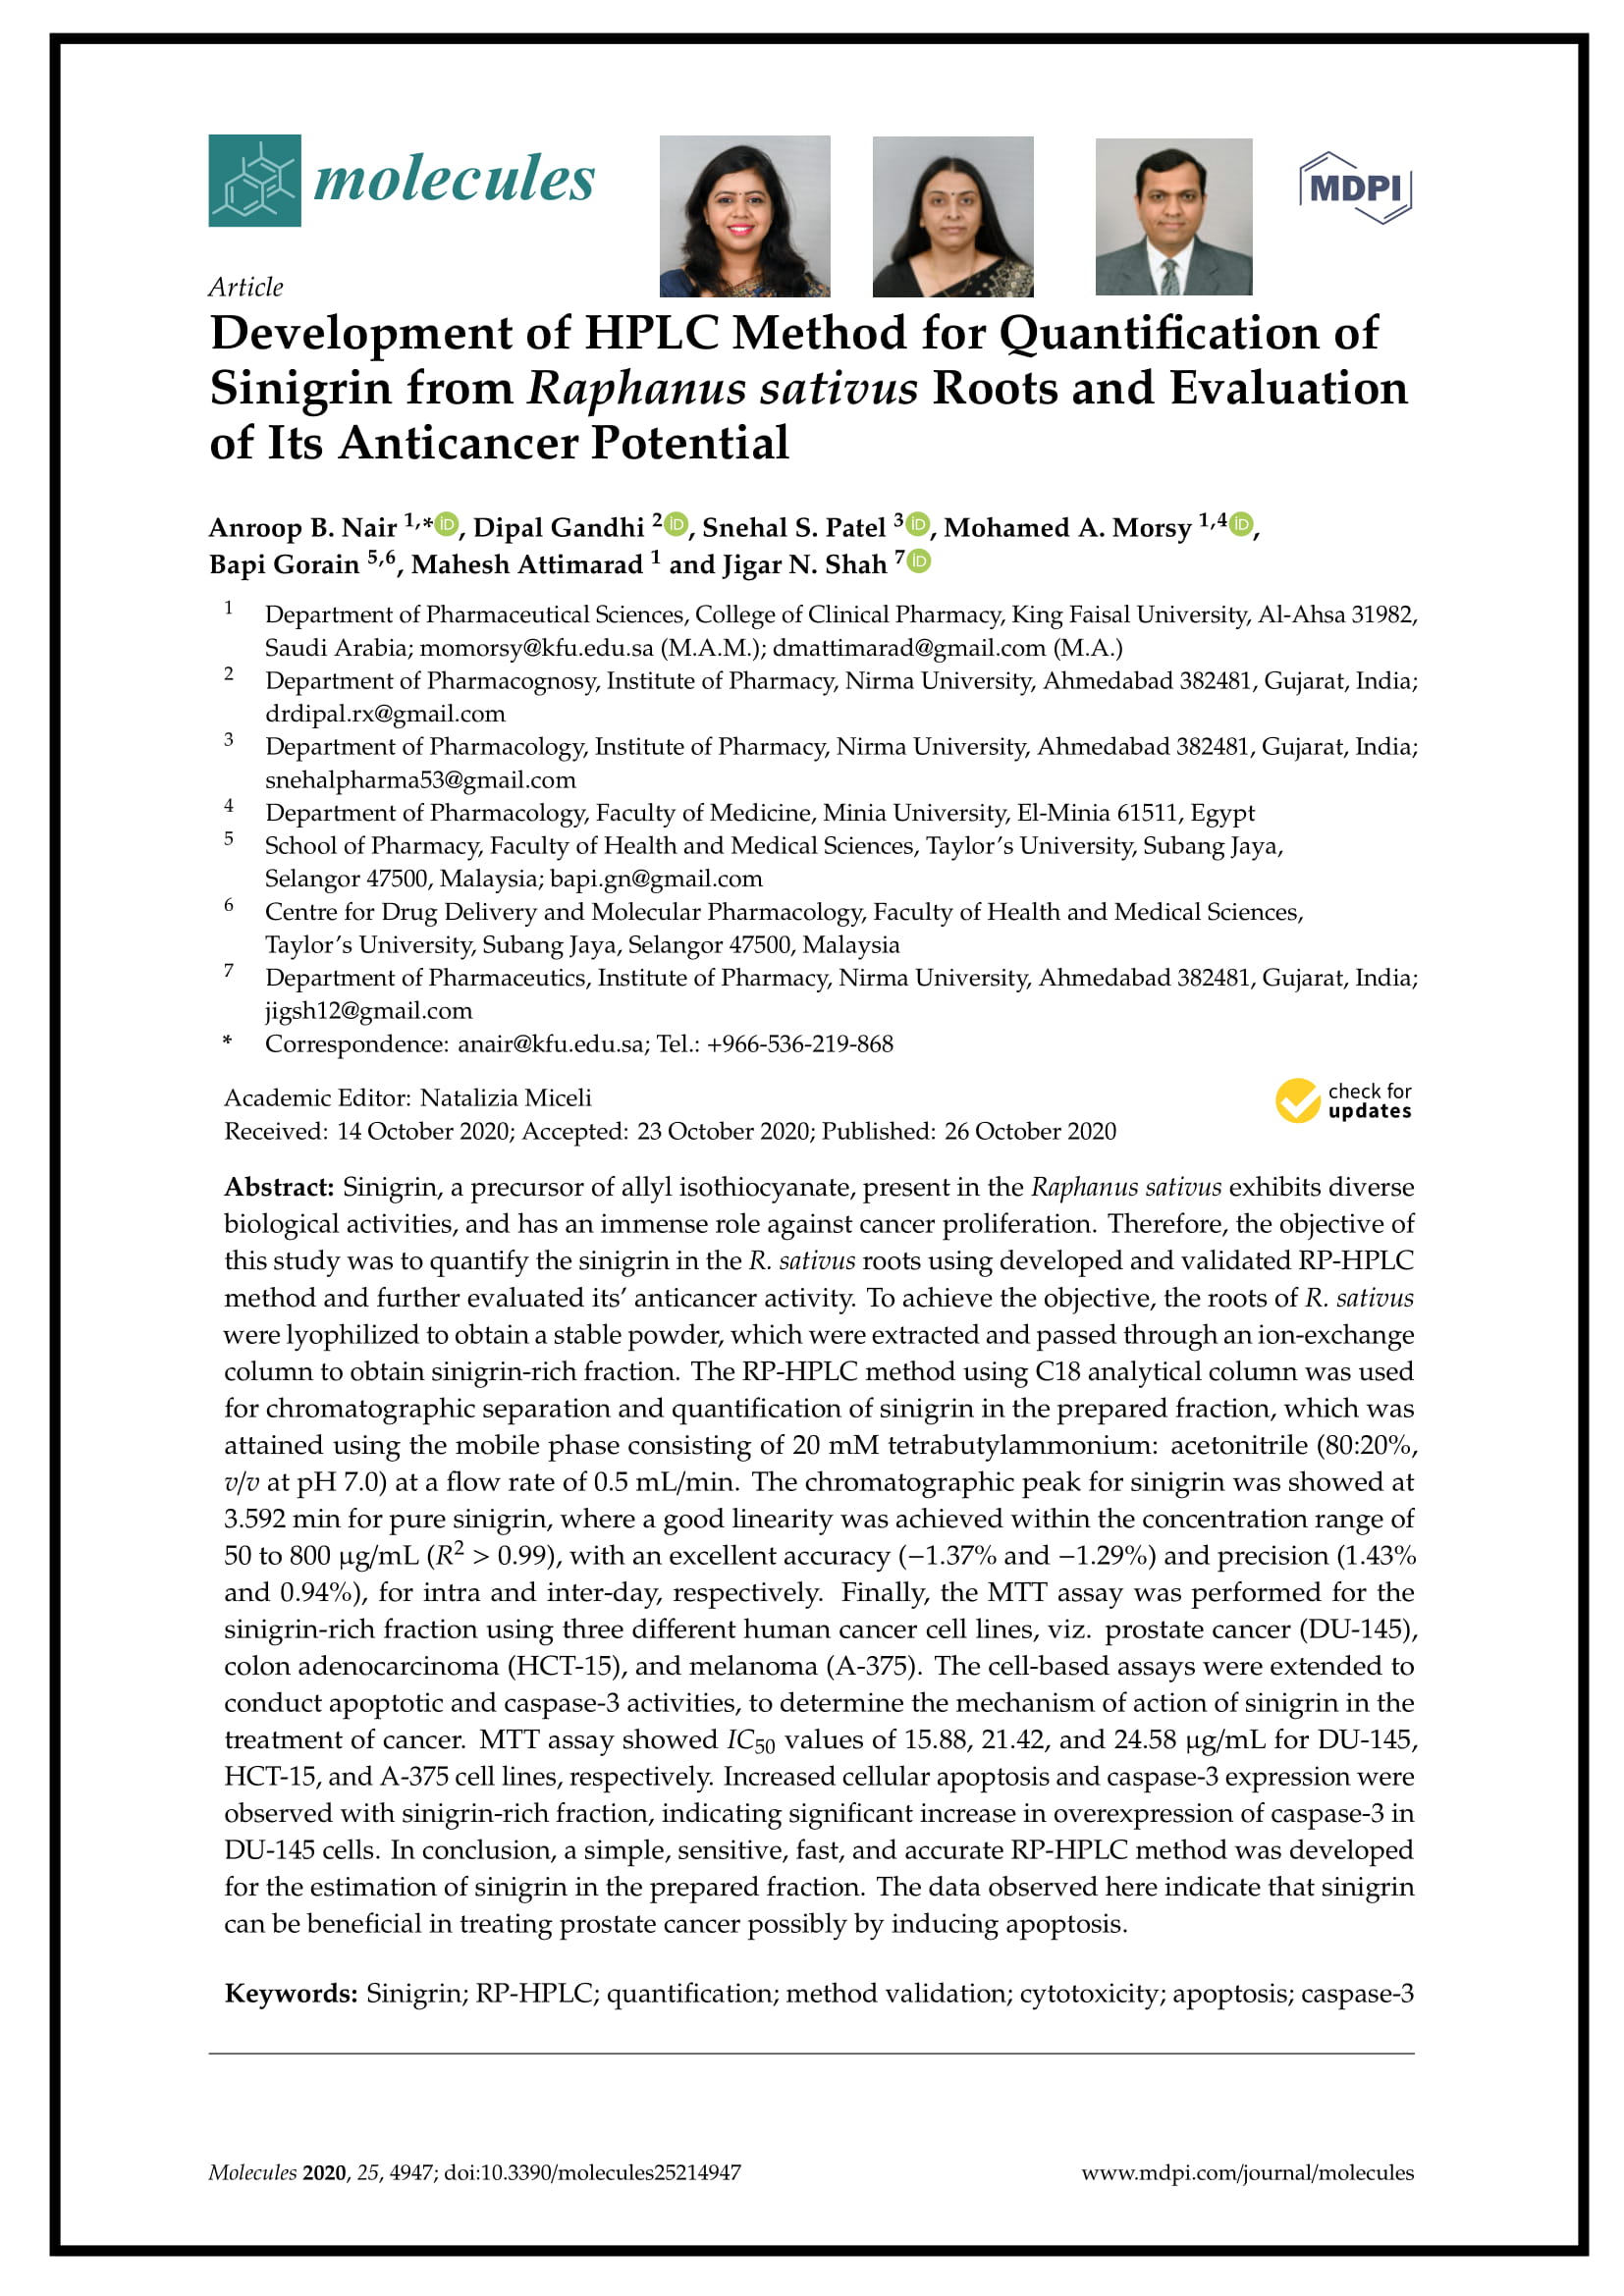 Development of HPLC Method for Quantification of Sinigrin from Raphanus sativus Roots and Evaluation of Its Anticancer Potential